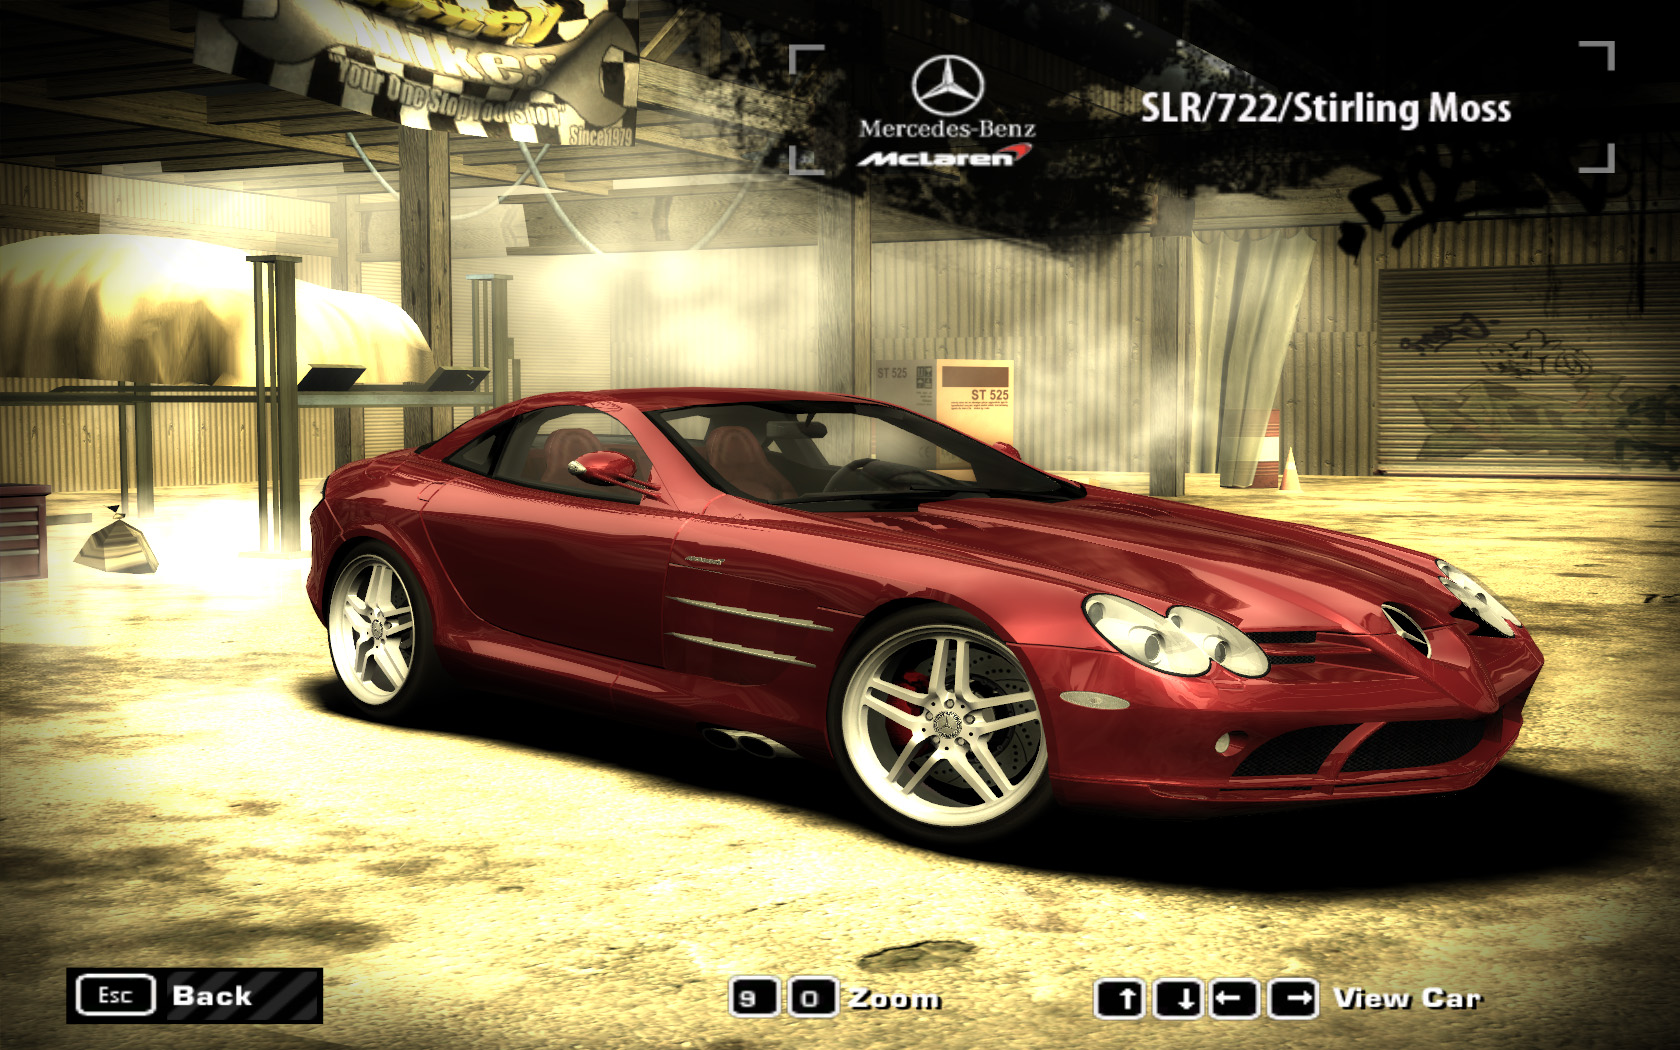 Need For Speed Most Wanted Mercedes Benz SLR/722/Stirling Moss